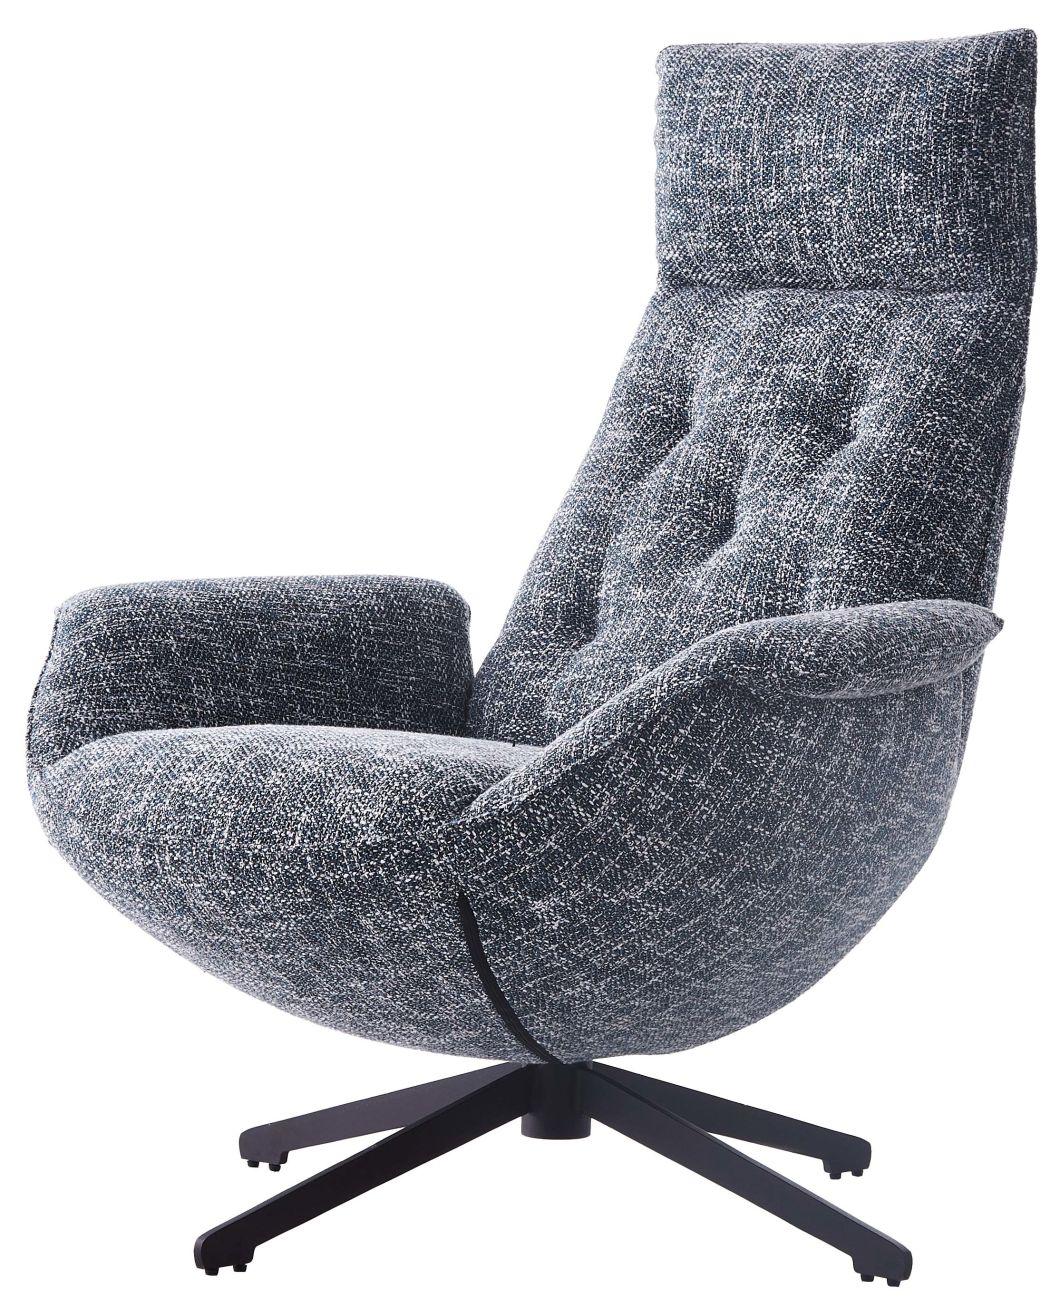 Dr909 Latest Design Fabric Leisure Chair, Italian Modern Leisure Chair, Living Room and Bed Room Set, Home Furniture and Hotel Furniture Customization